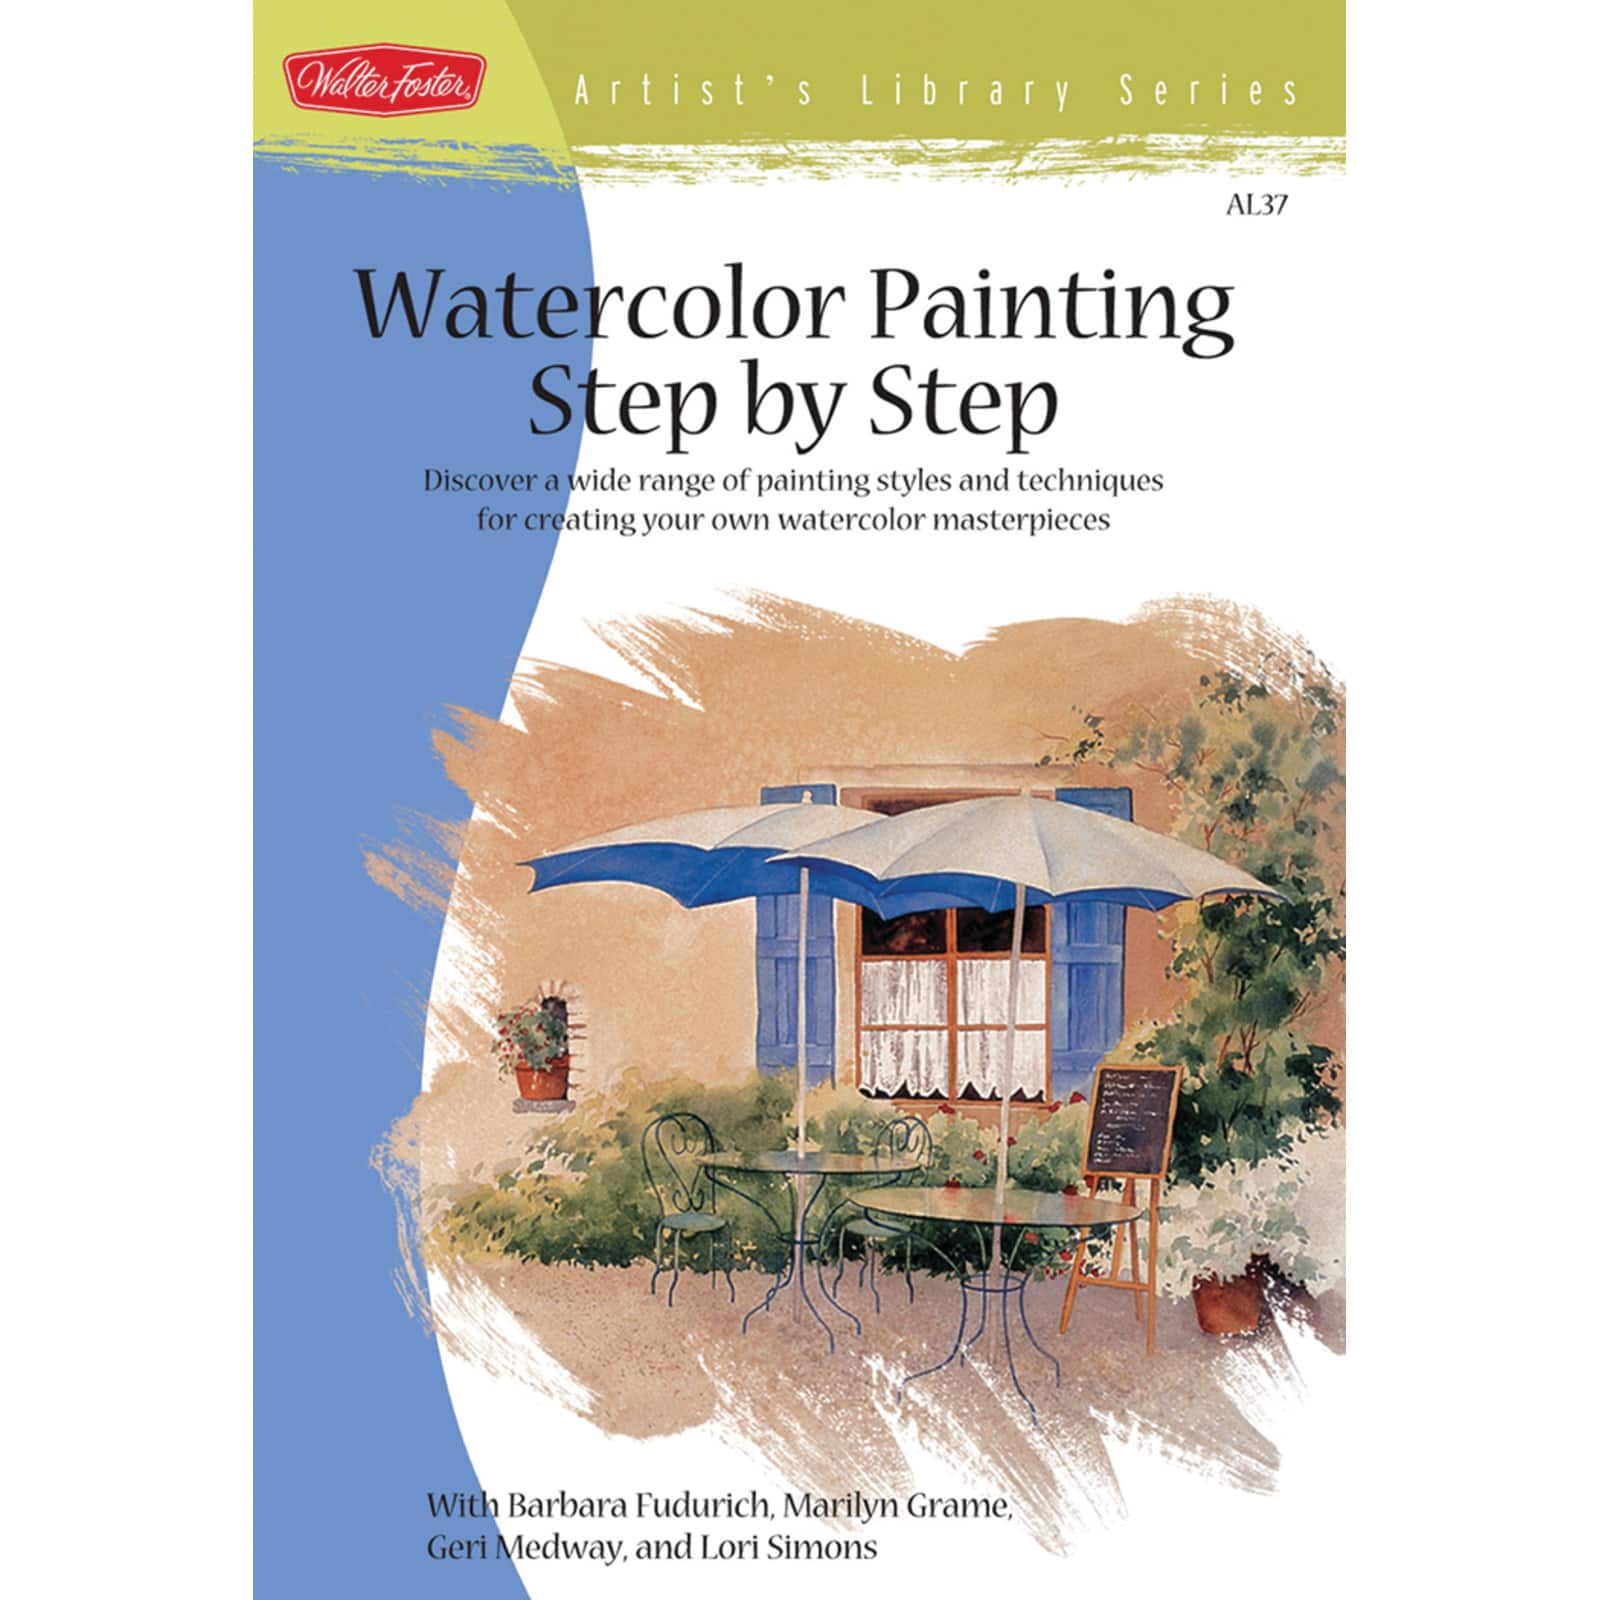 How To Watercolor: The Ultimate Beginner's Guide to Painting with Creative  Techniques and Inspiring Projects: Watercolor Painting Book (Paperback)